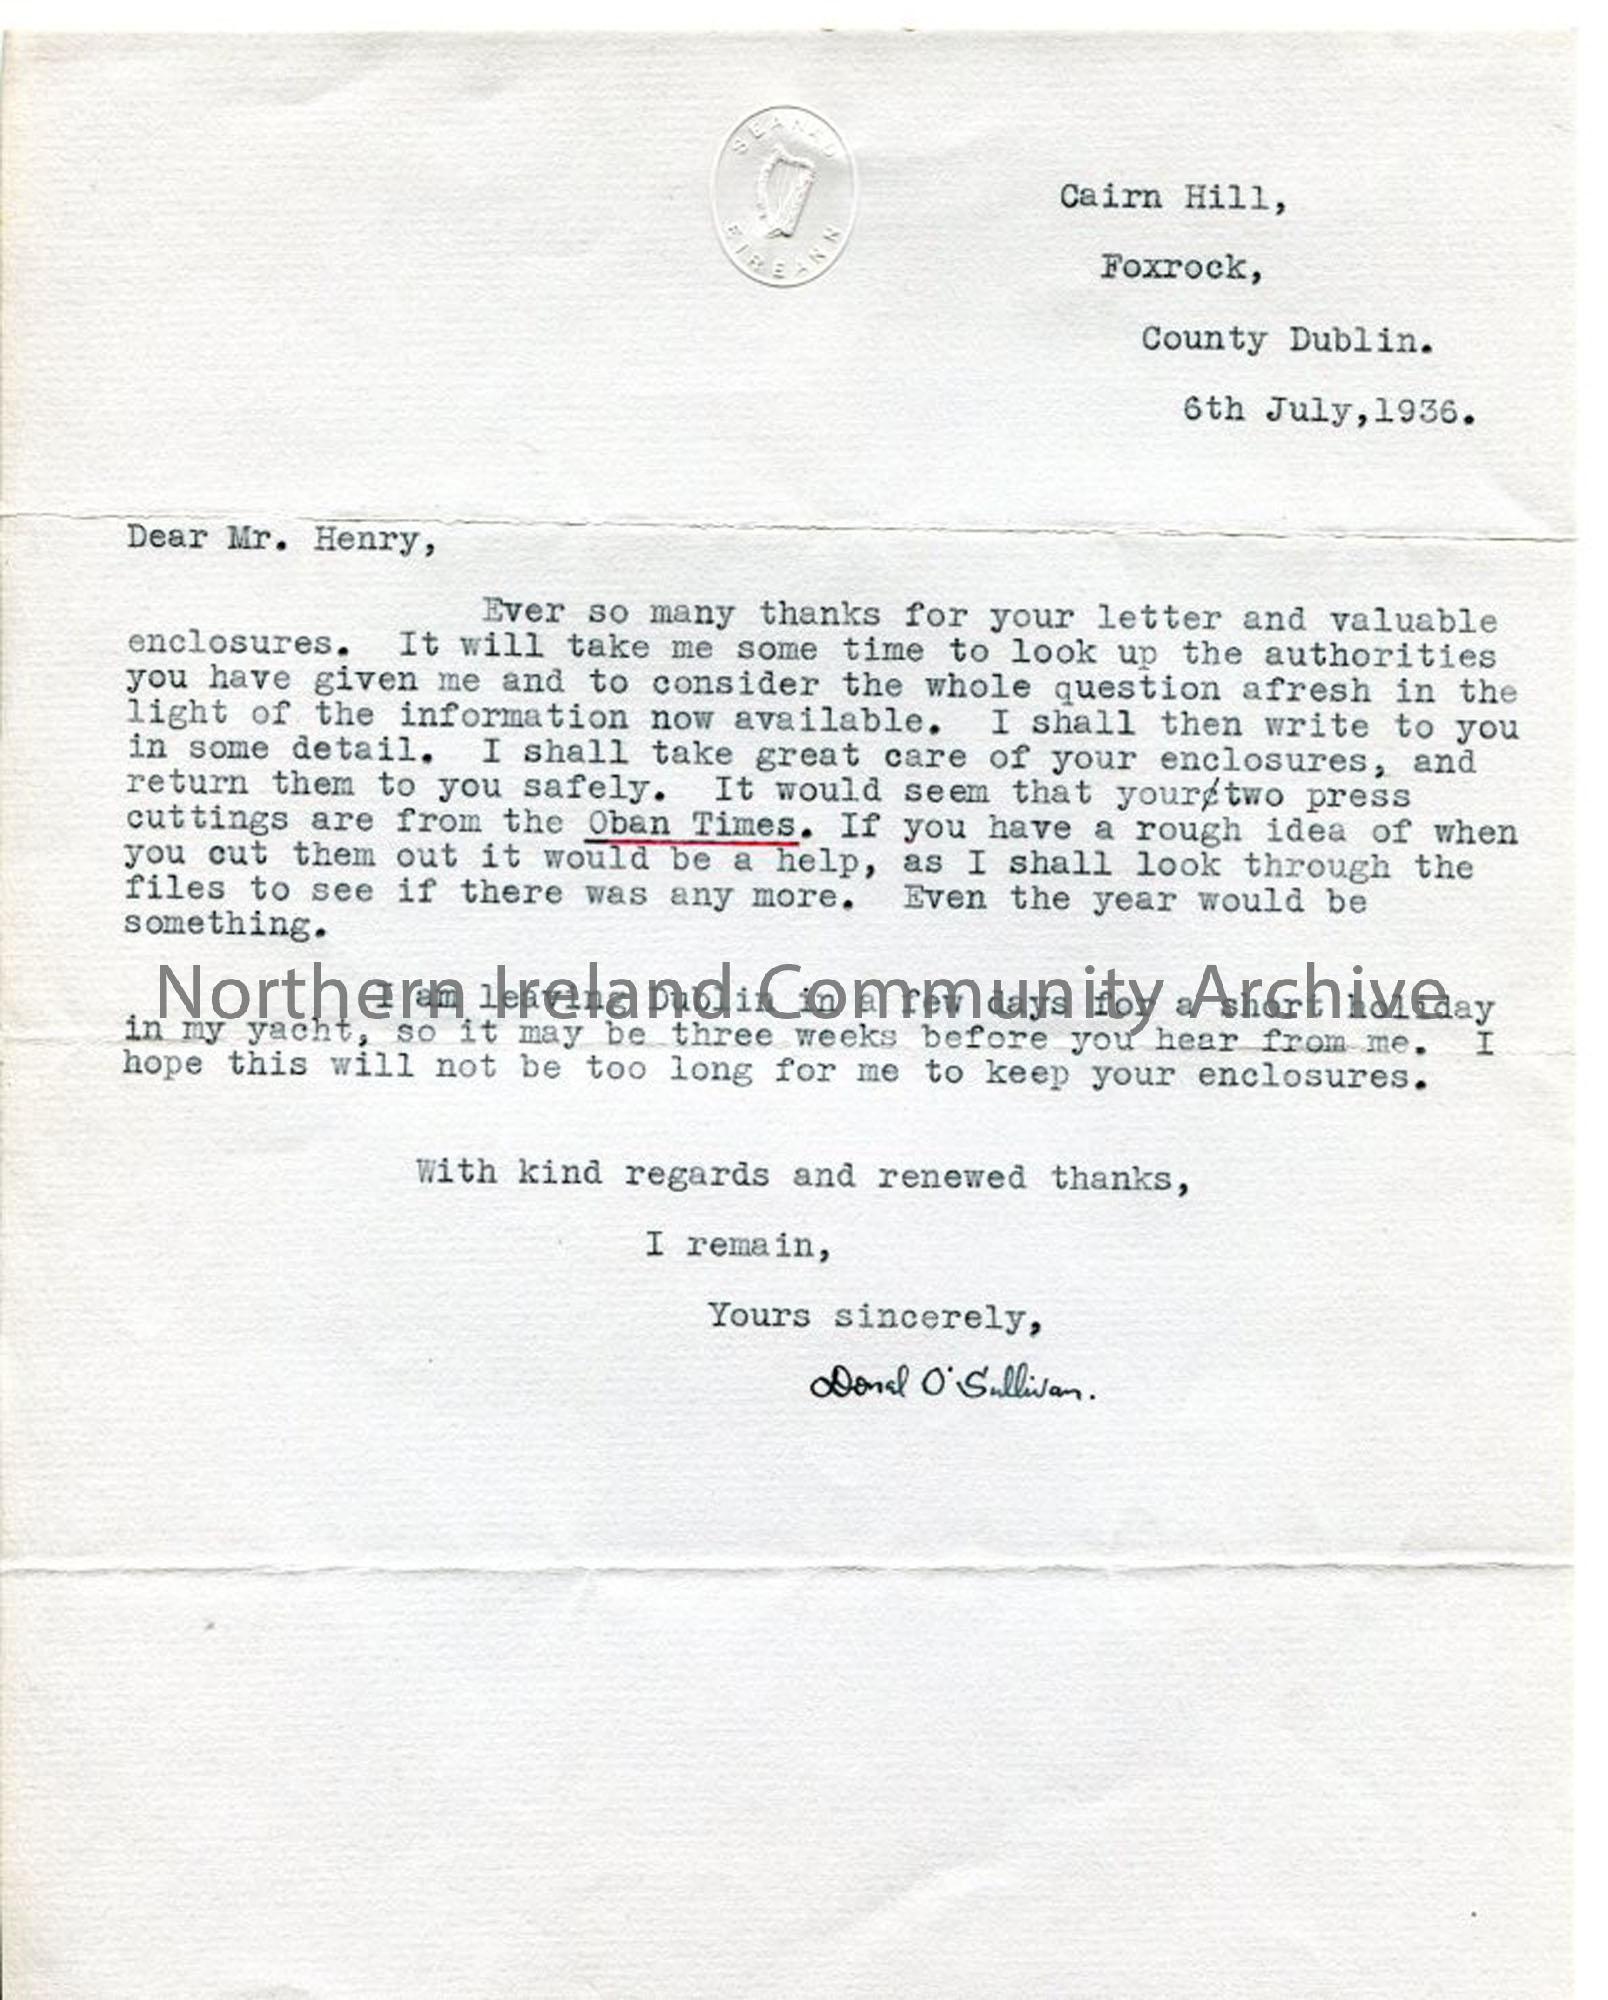 Letter from Donal O’Sulivan, 6.7.1936